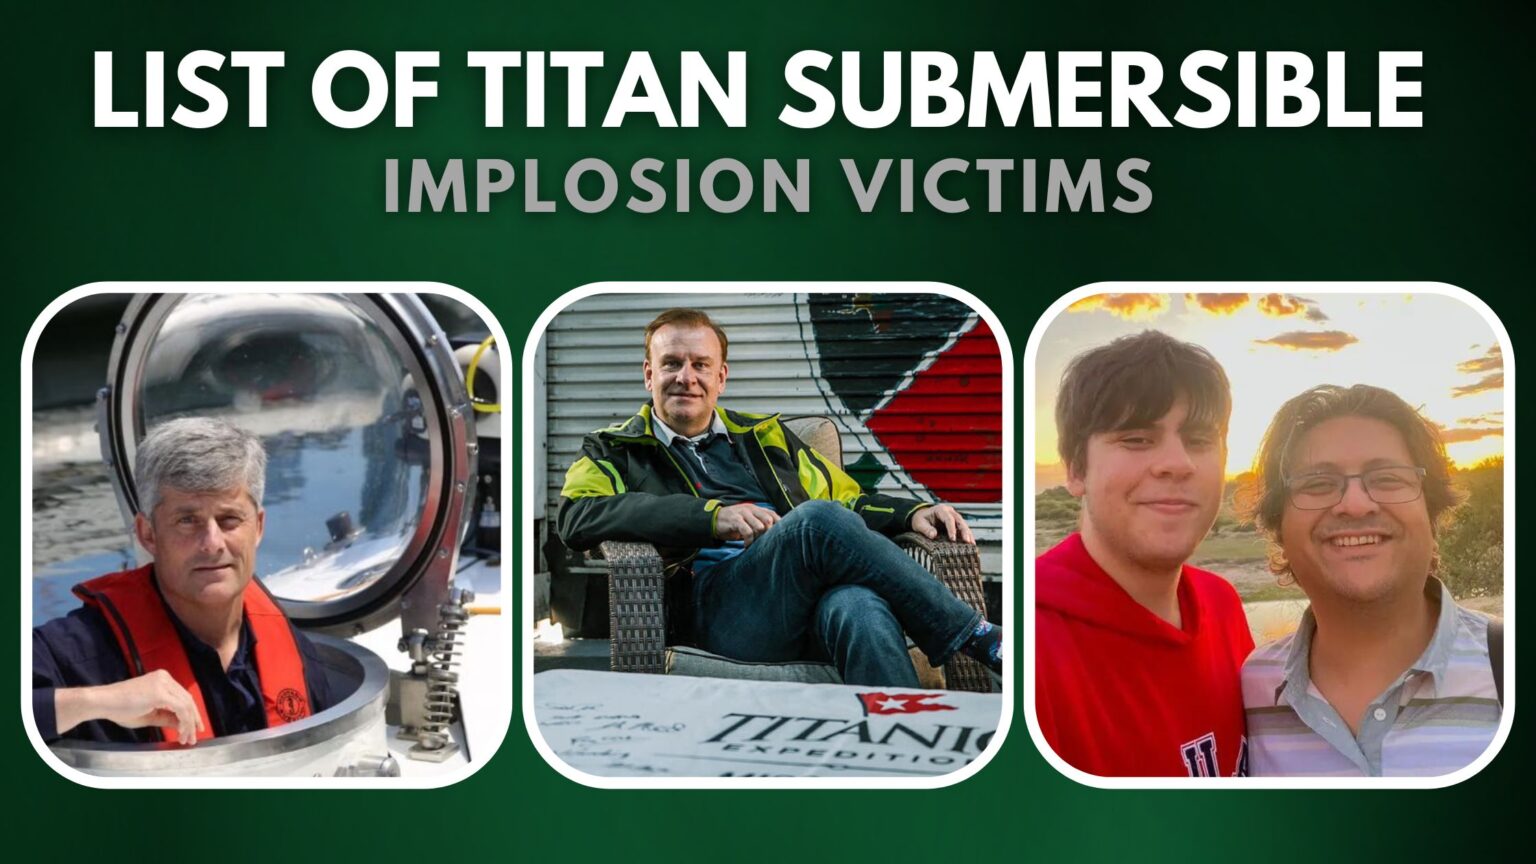 List of Titan Submersible Implosion Victims